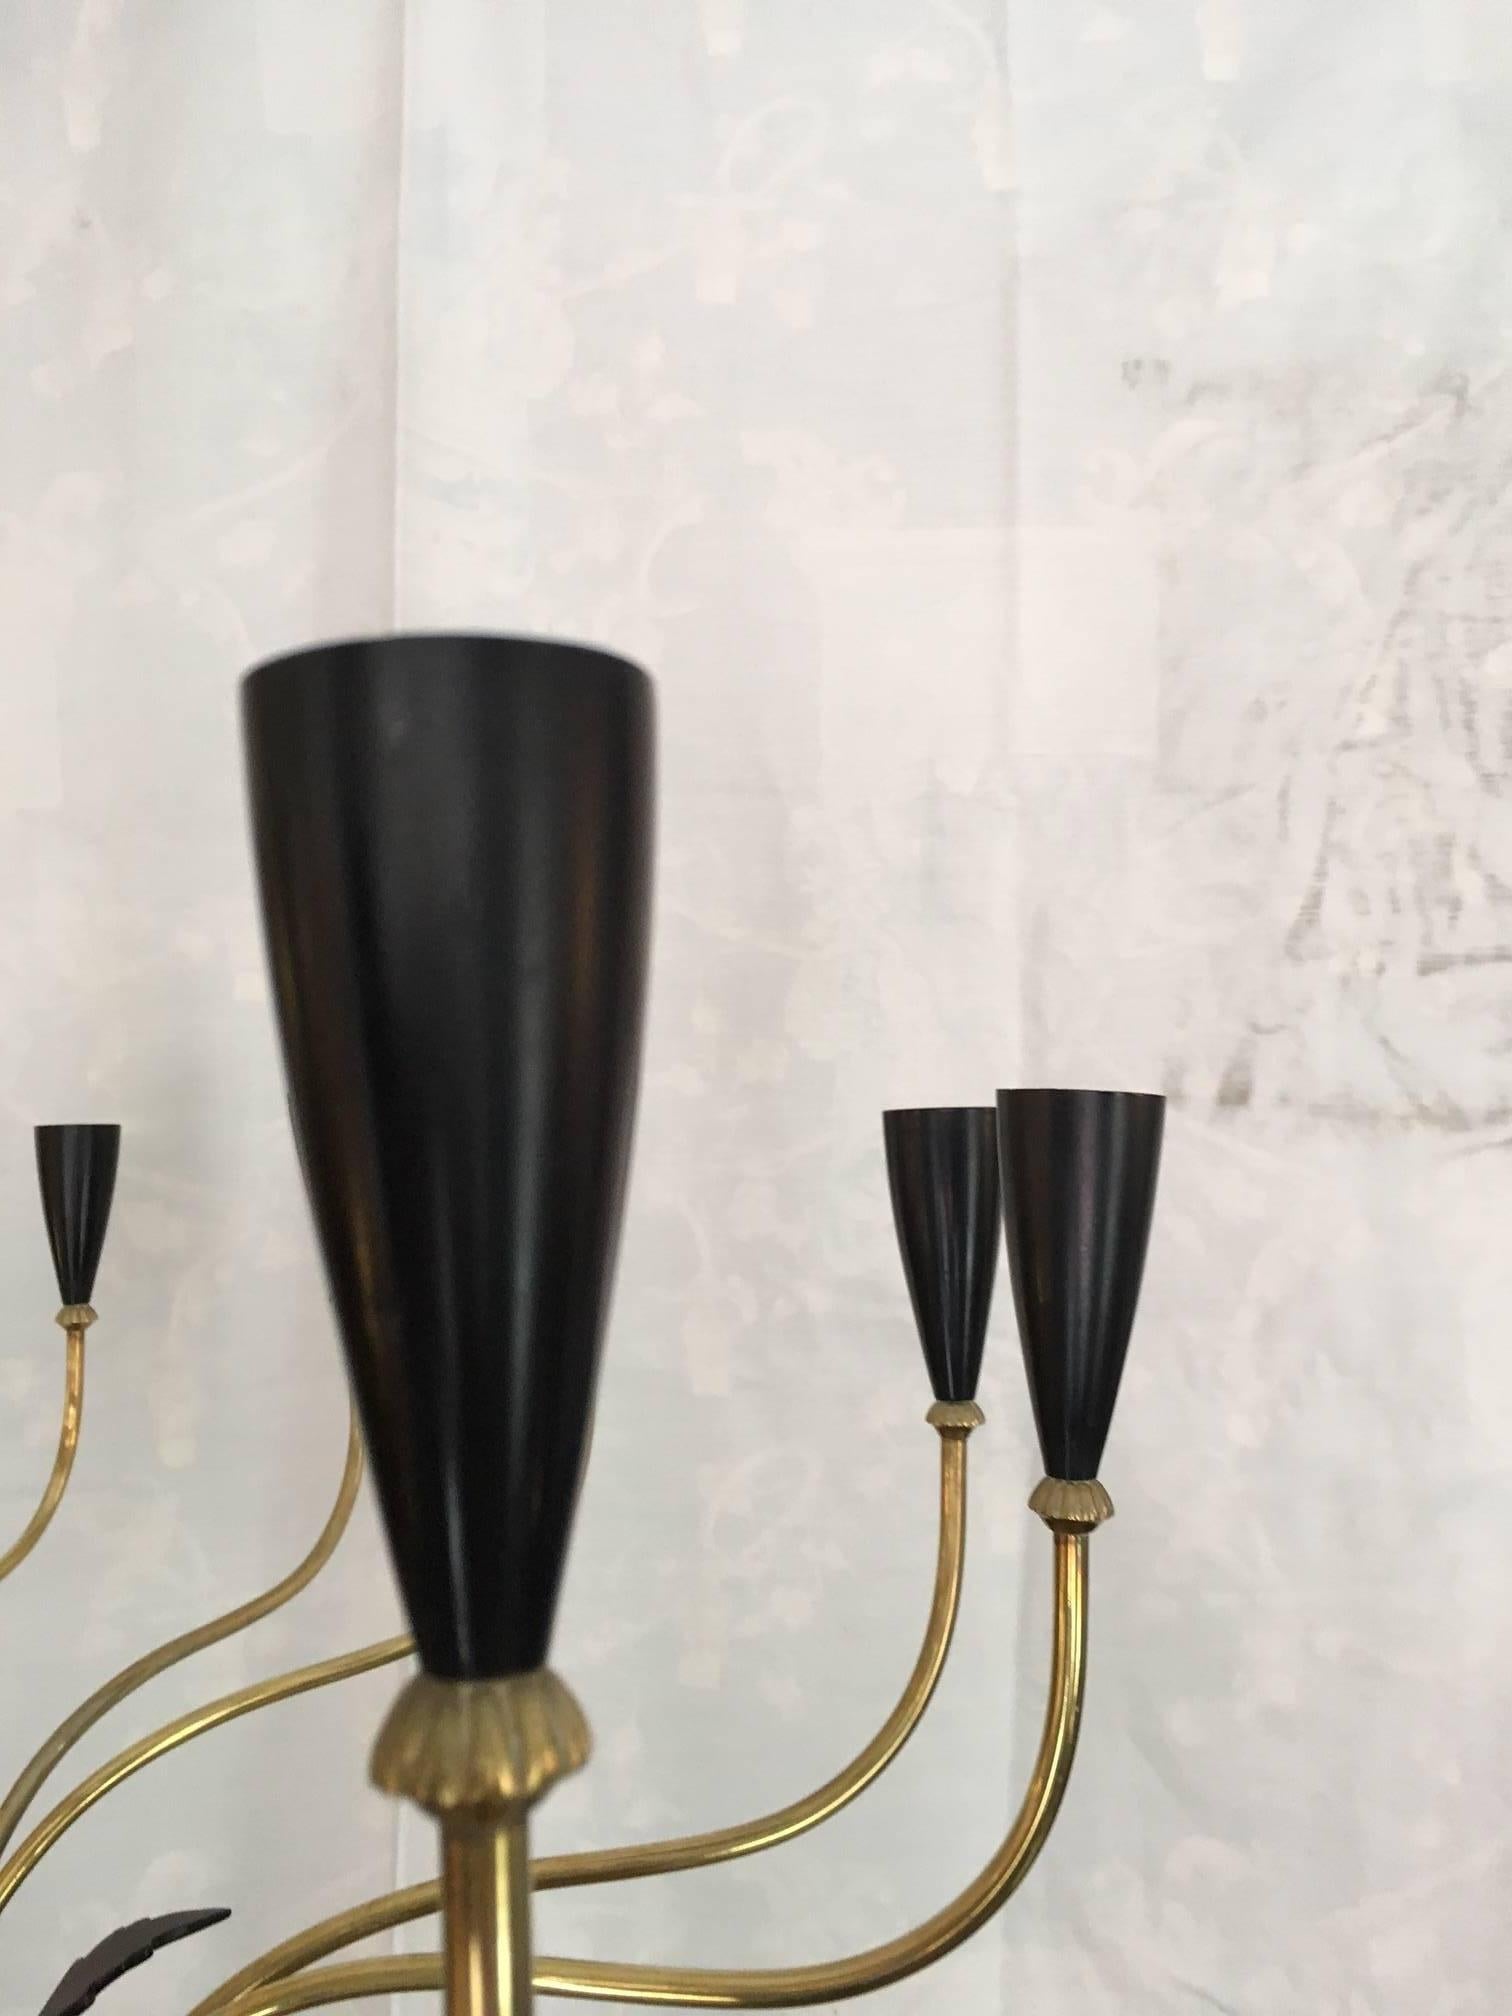 Pair of large sized chandeliers Oscar Torlasco style, with eight double arms that finish in 16 lacquered black screens, the whole lamp is made in gold and enameled brass.